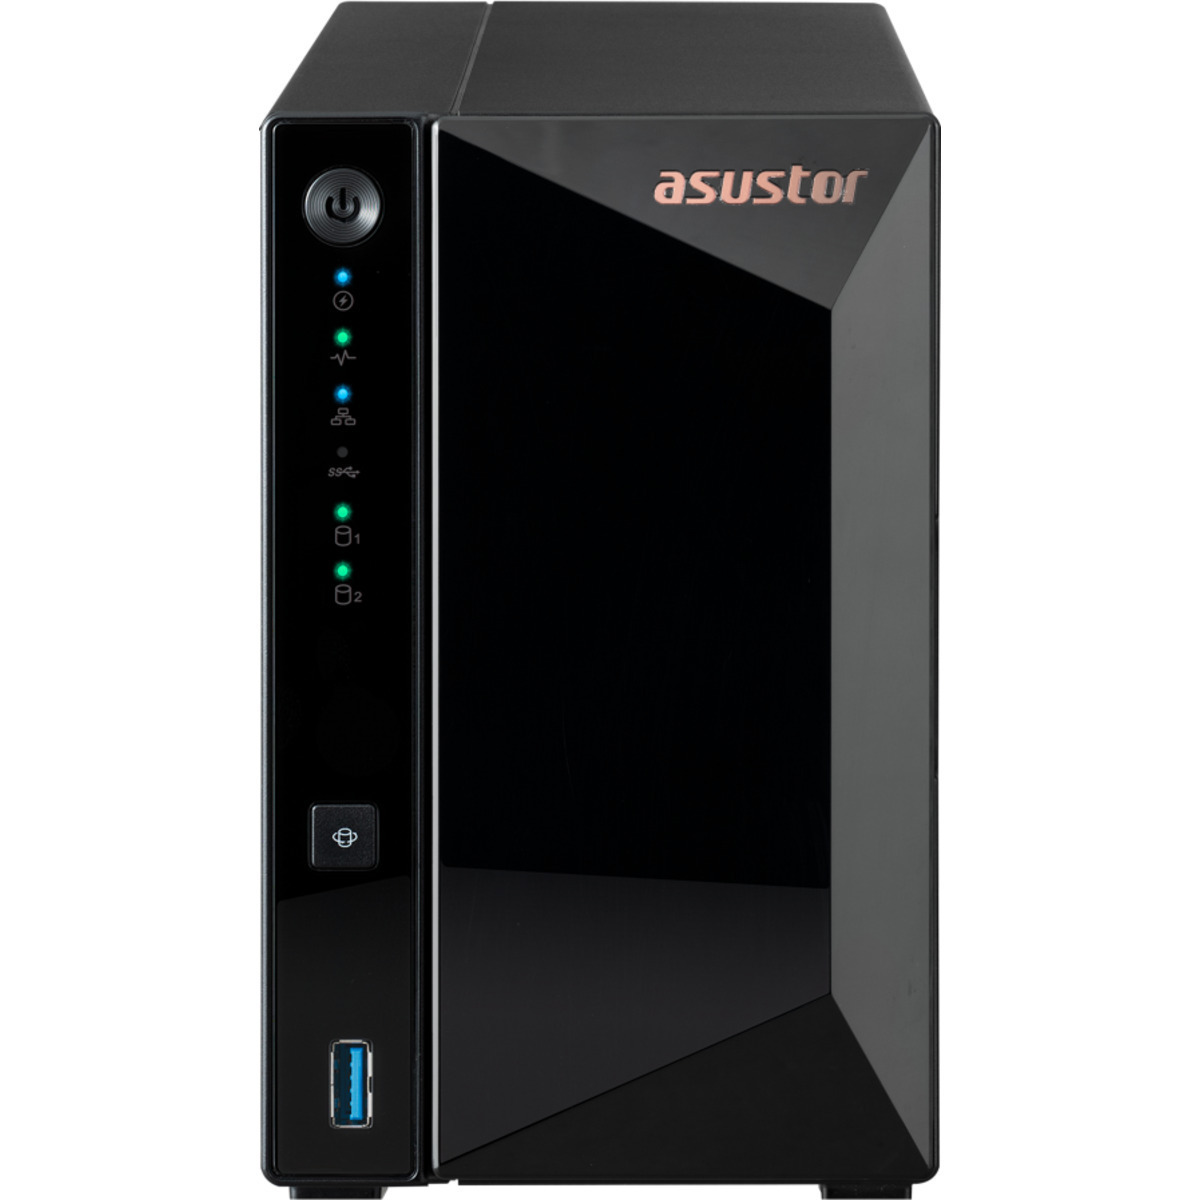 ASUSTOR DRIVESTOR 2 Pro Gen2 AS3302T v2 16tb 2-Bay Desktop Personal / Basic Home / Small Office NAS - Network Attached Storage Device 2x8tb Western Digital Red Plus WD80EFPX 3.5 7200rpm SATA 6Gb/s HDD NAS Class Drives Installed - Burn-In Tested - ON SALE DRIVESTOR 2 Pro Gen2 AS3302T v2